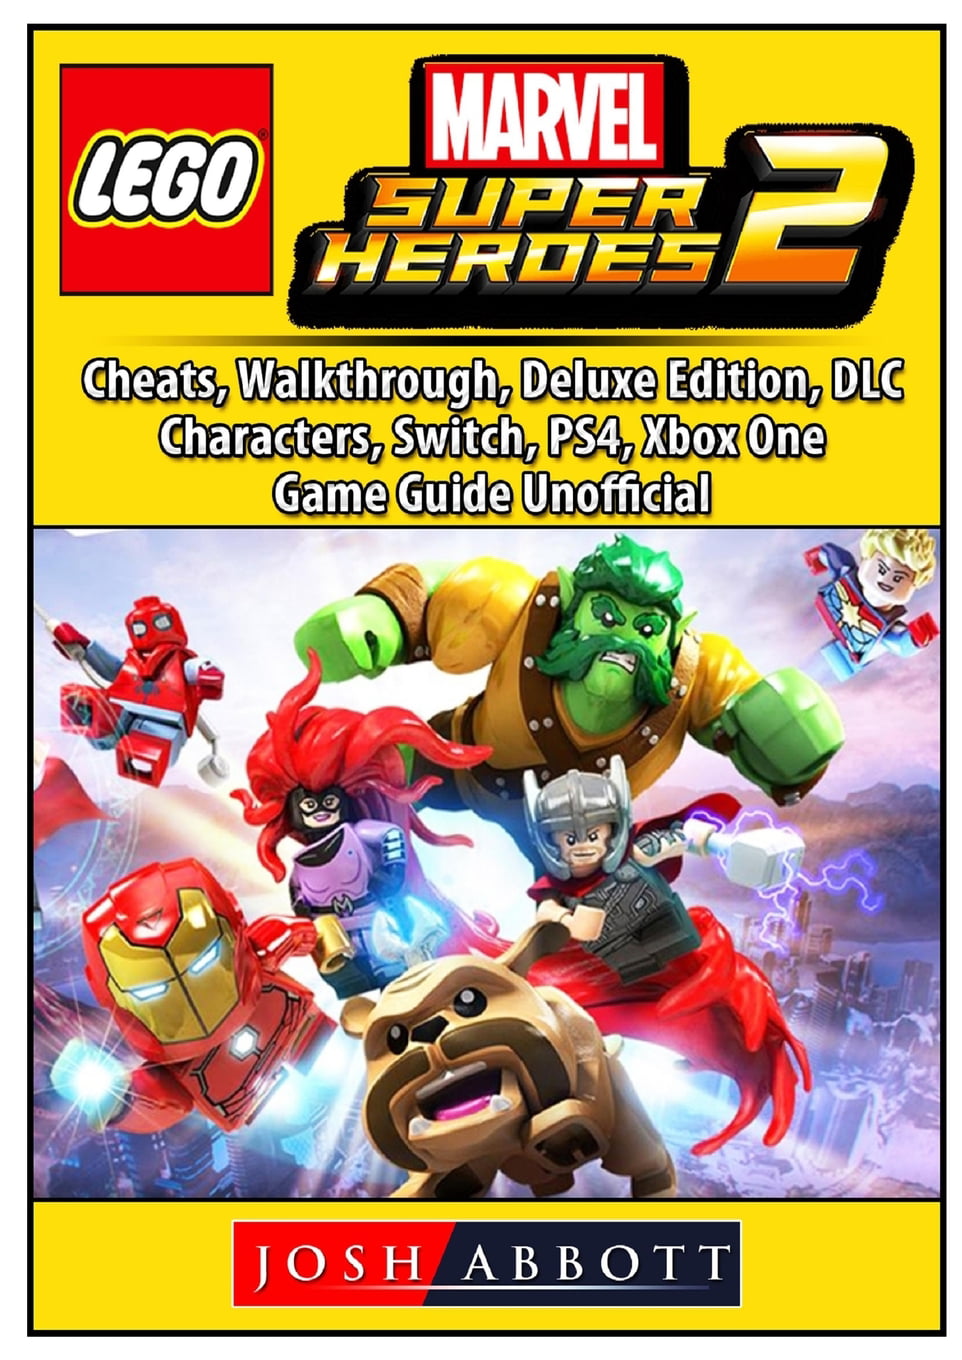 Xbox 360 Cheats - LEGO Marvel Super Heroes Guide - IGN